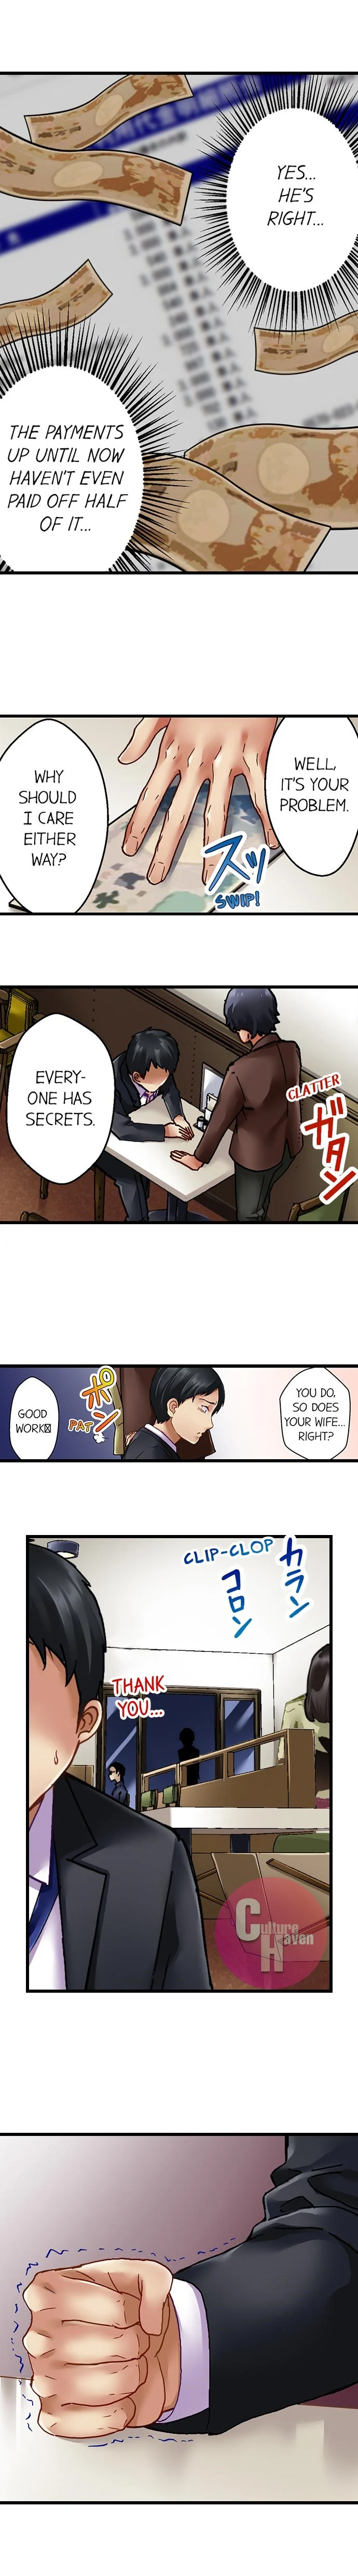 Selling My Wife’s Secrets - Chapter 4 Page 8